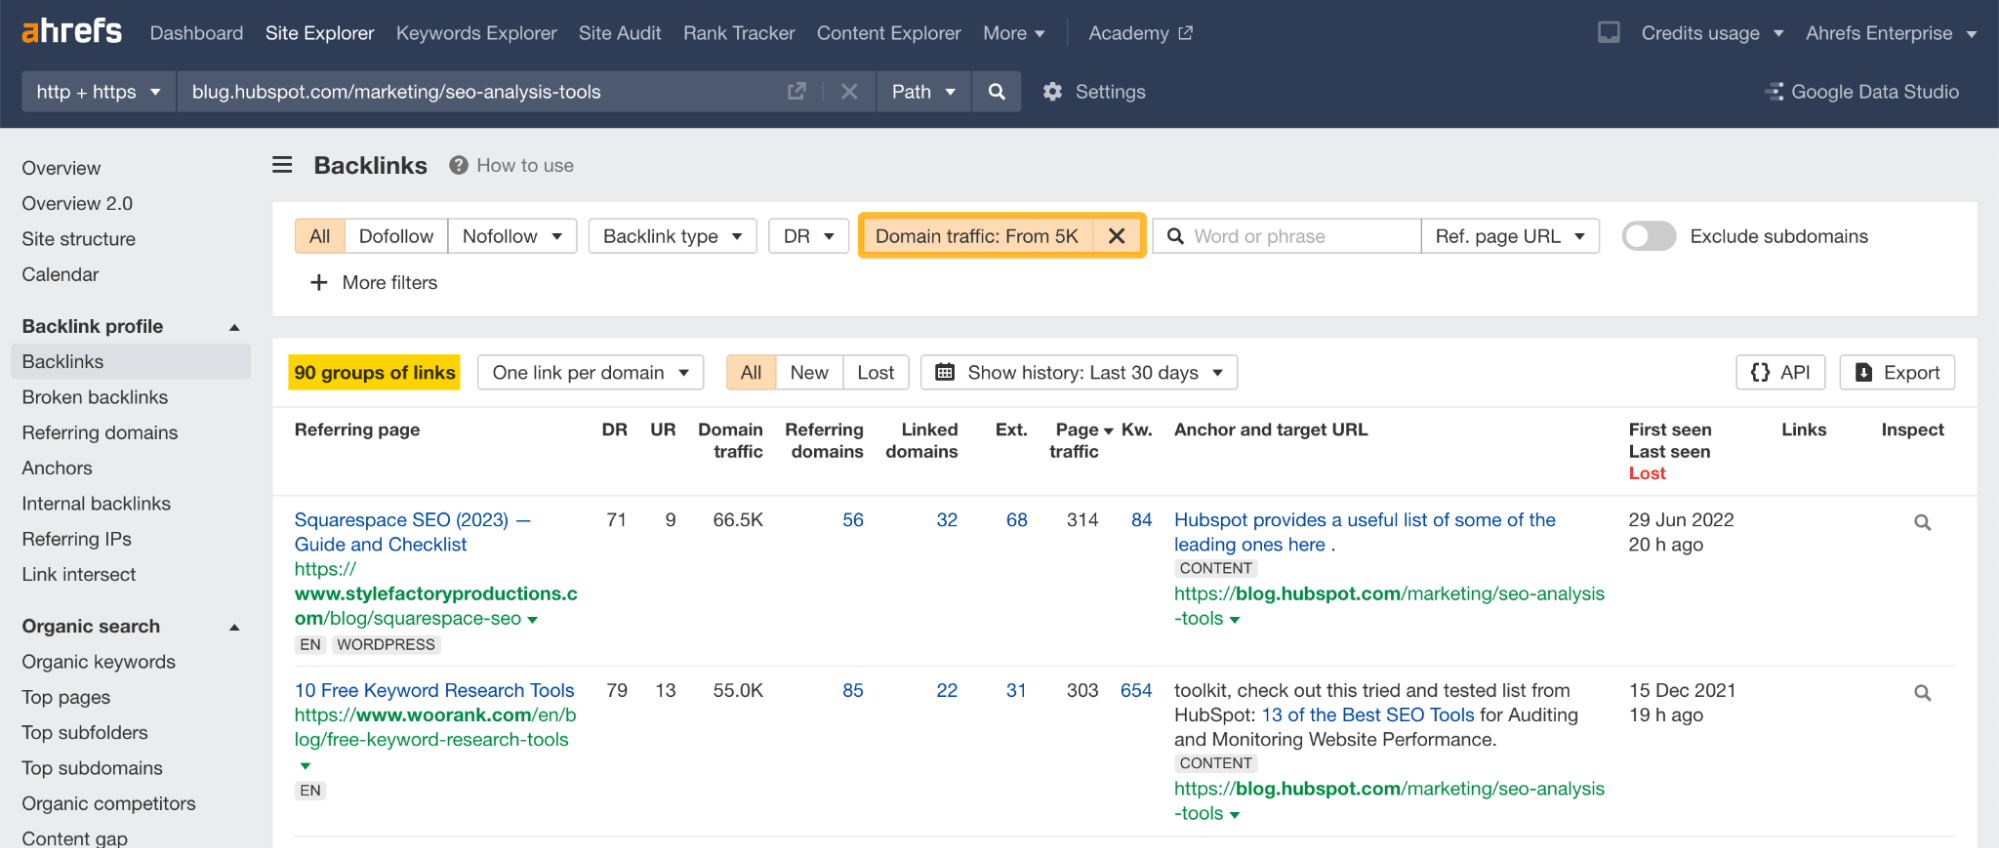 Backlinks report with a "Domain traffic" filter applied, via Ahrefs' Site Explorer